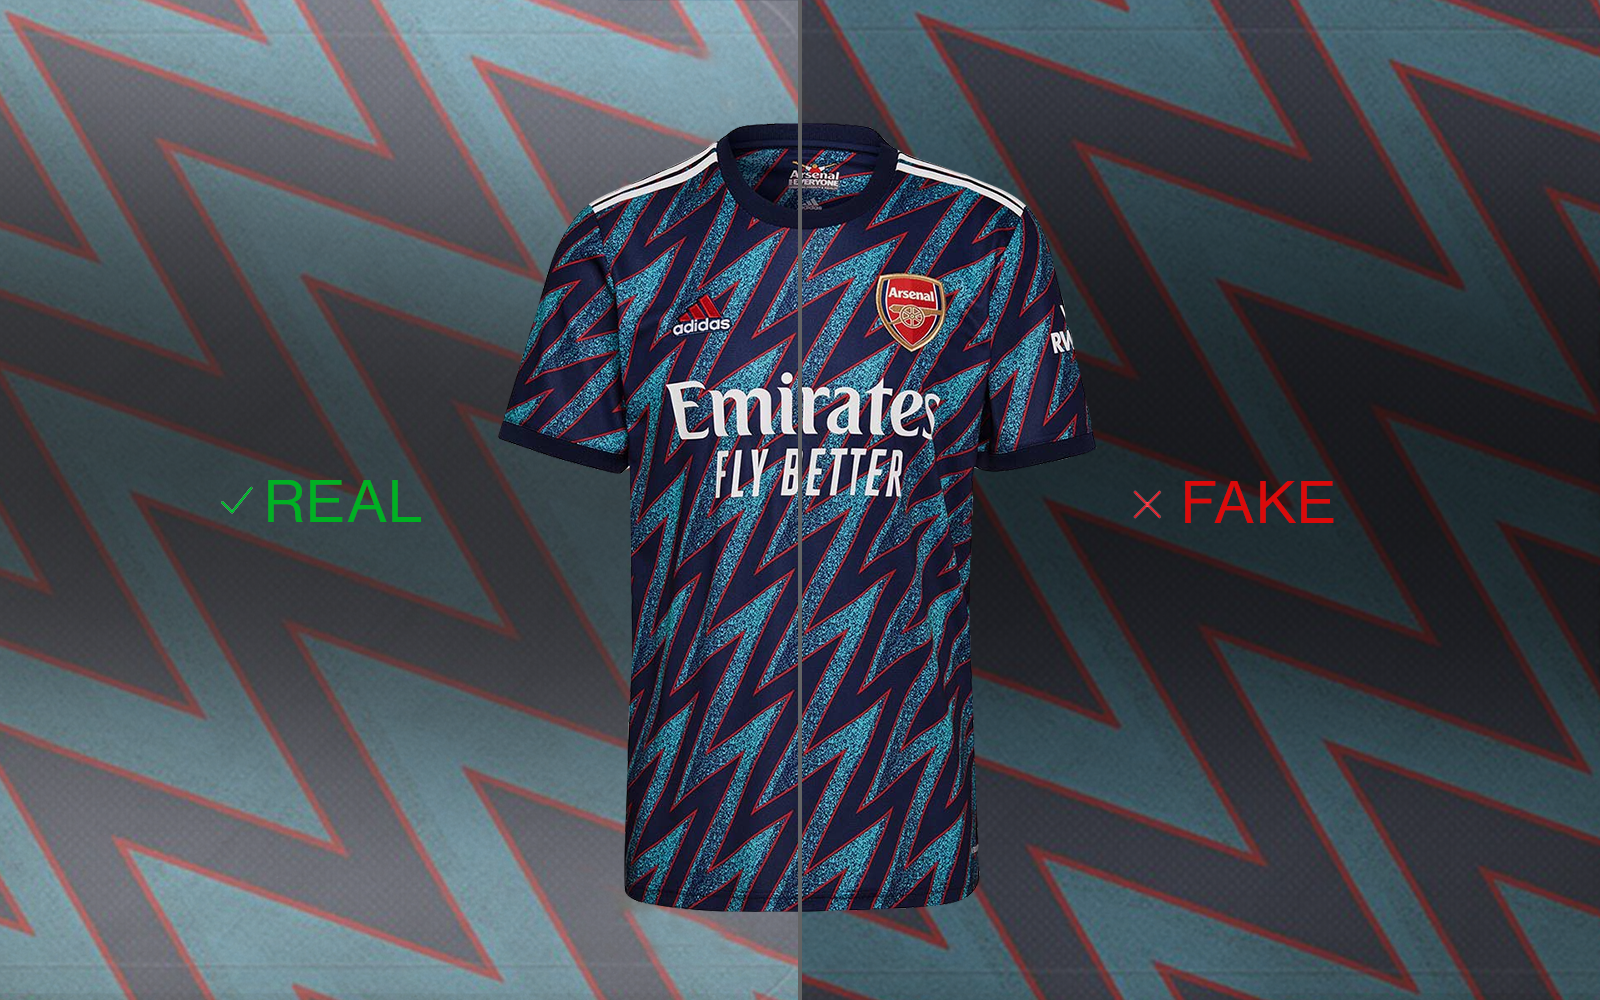 Real vs Fake Jerseys: What's the Difference? 